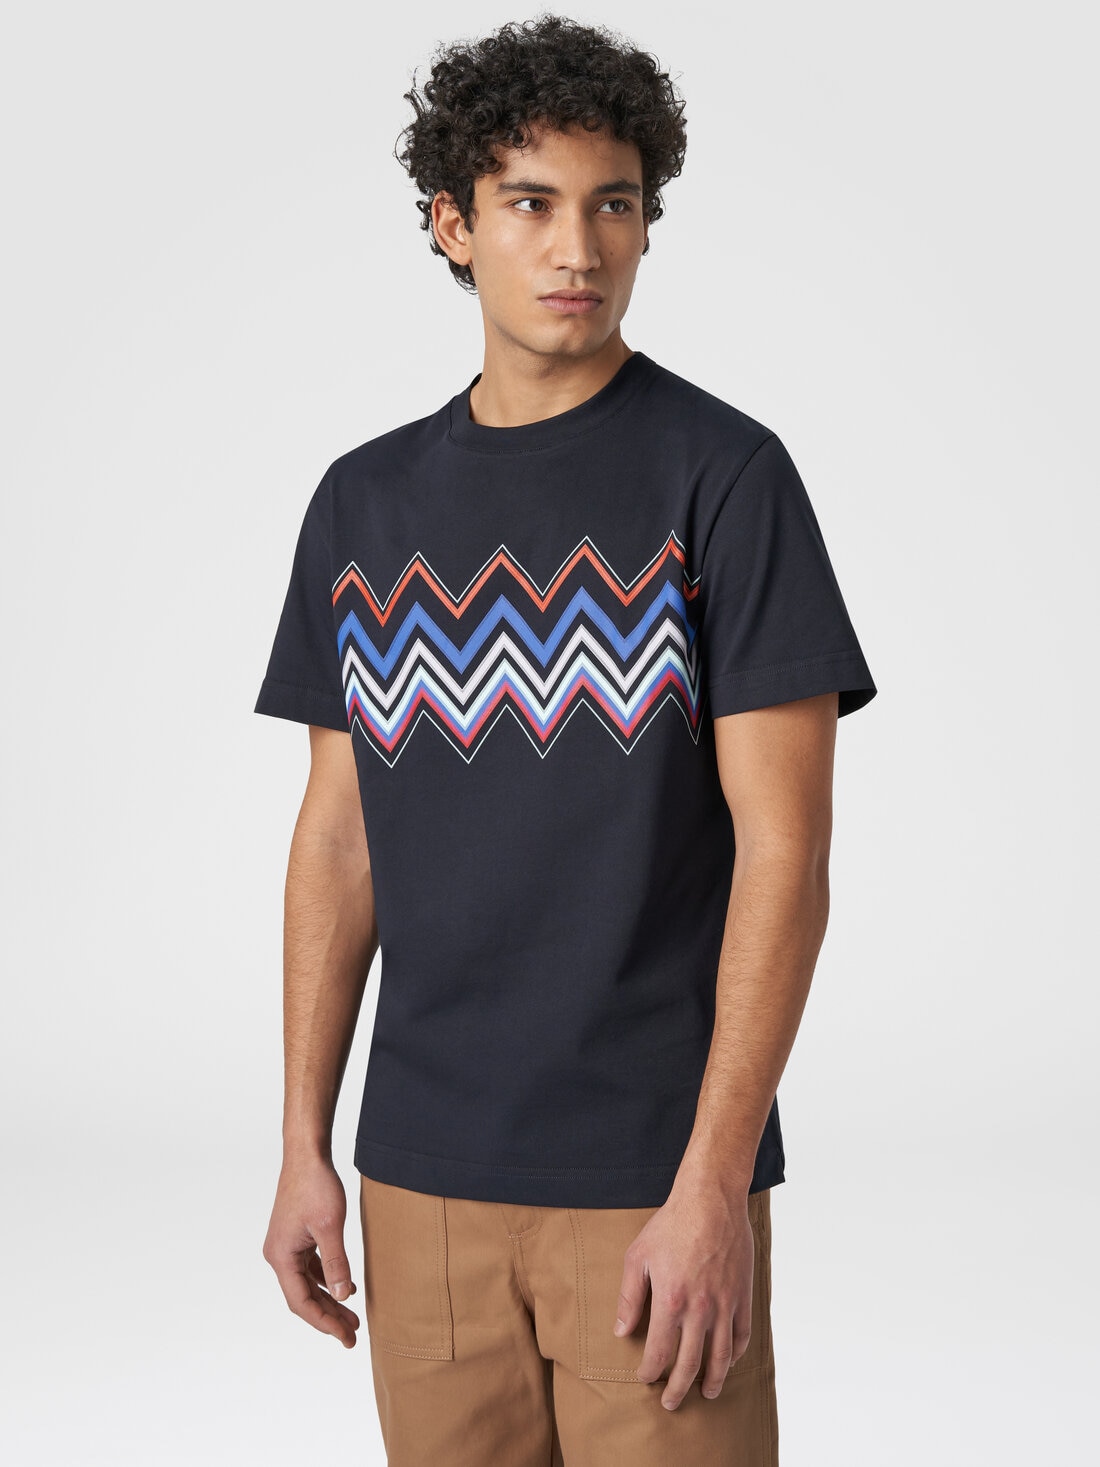 Short-sleeved T-shirt in cotton with zigzag print, Multicoloured  - US24SL0CBJ00J3S72E2 - 3